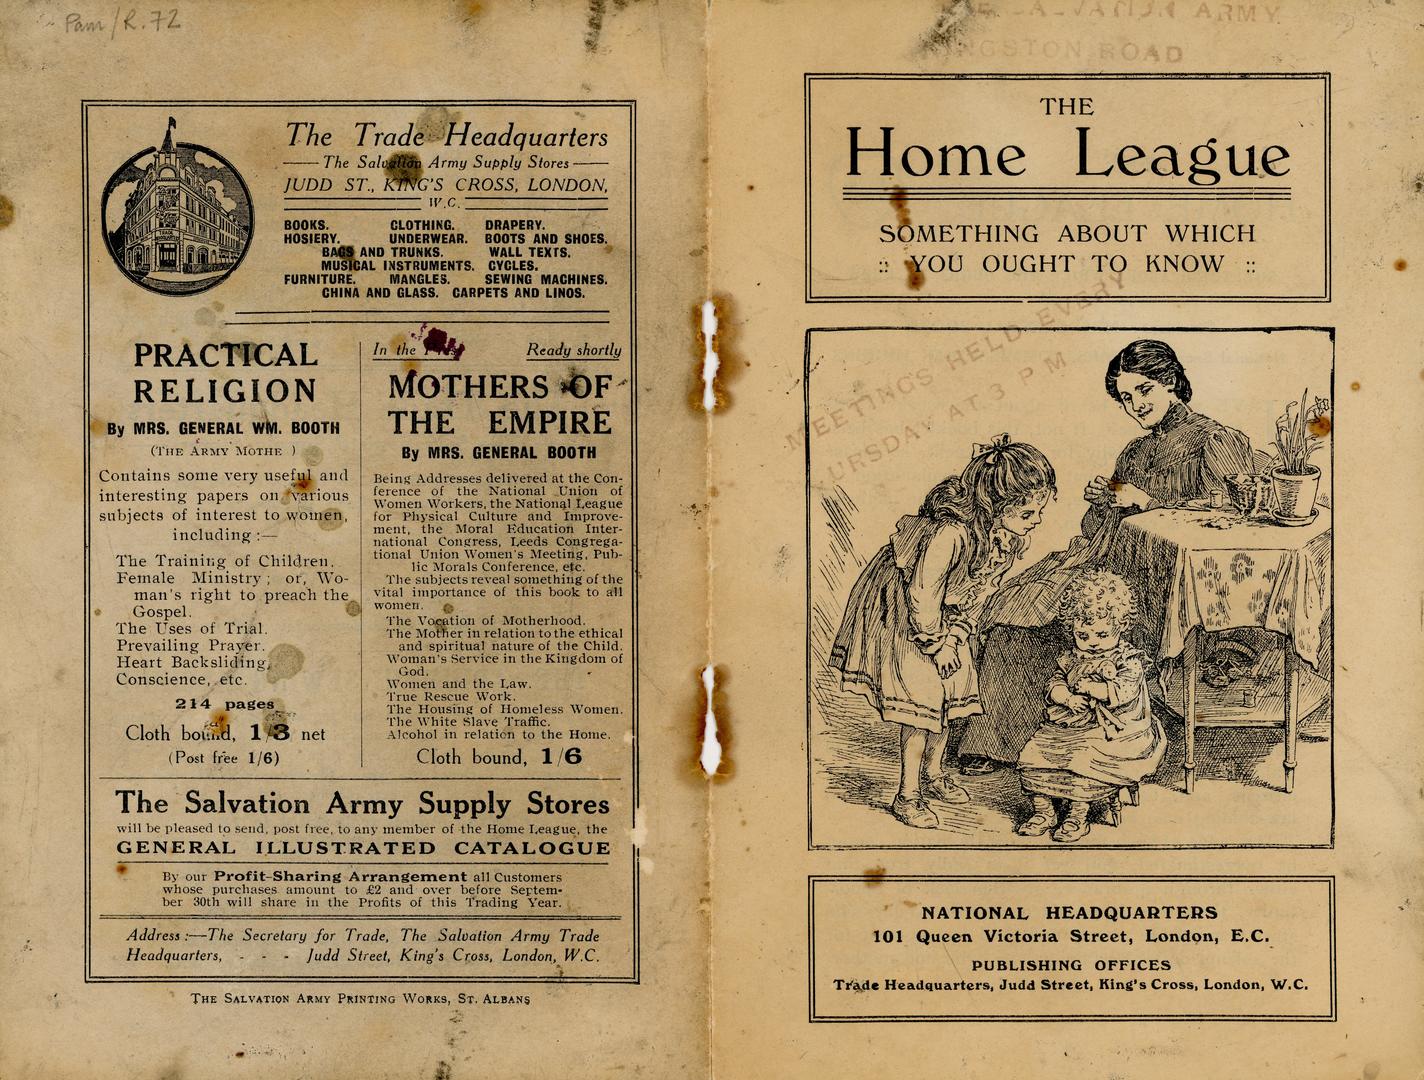 The Home League, pamphlet, 1914